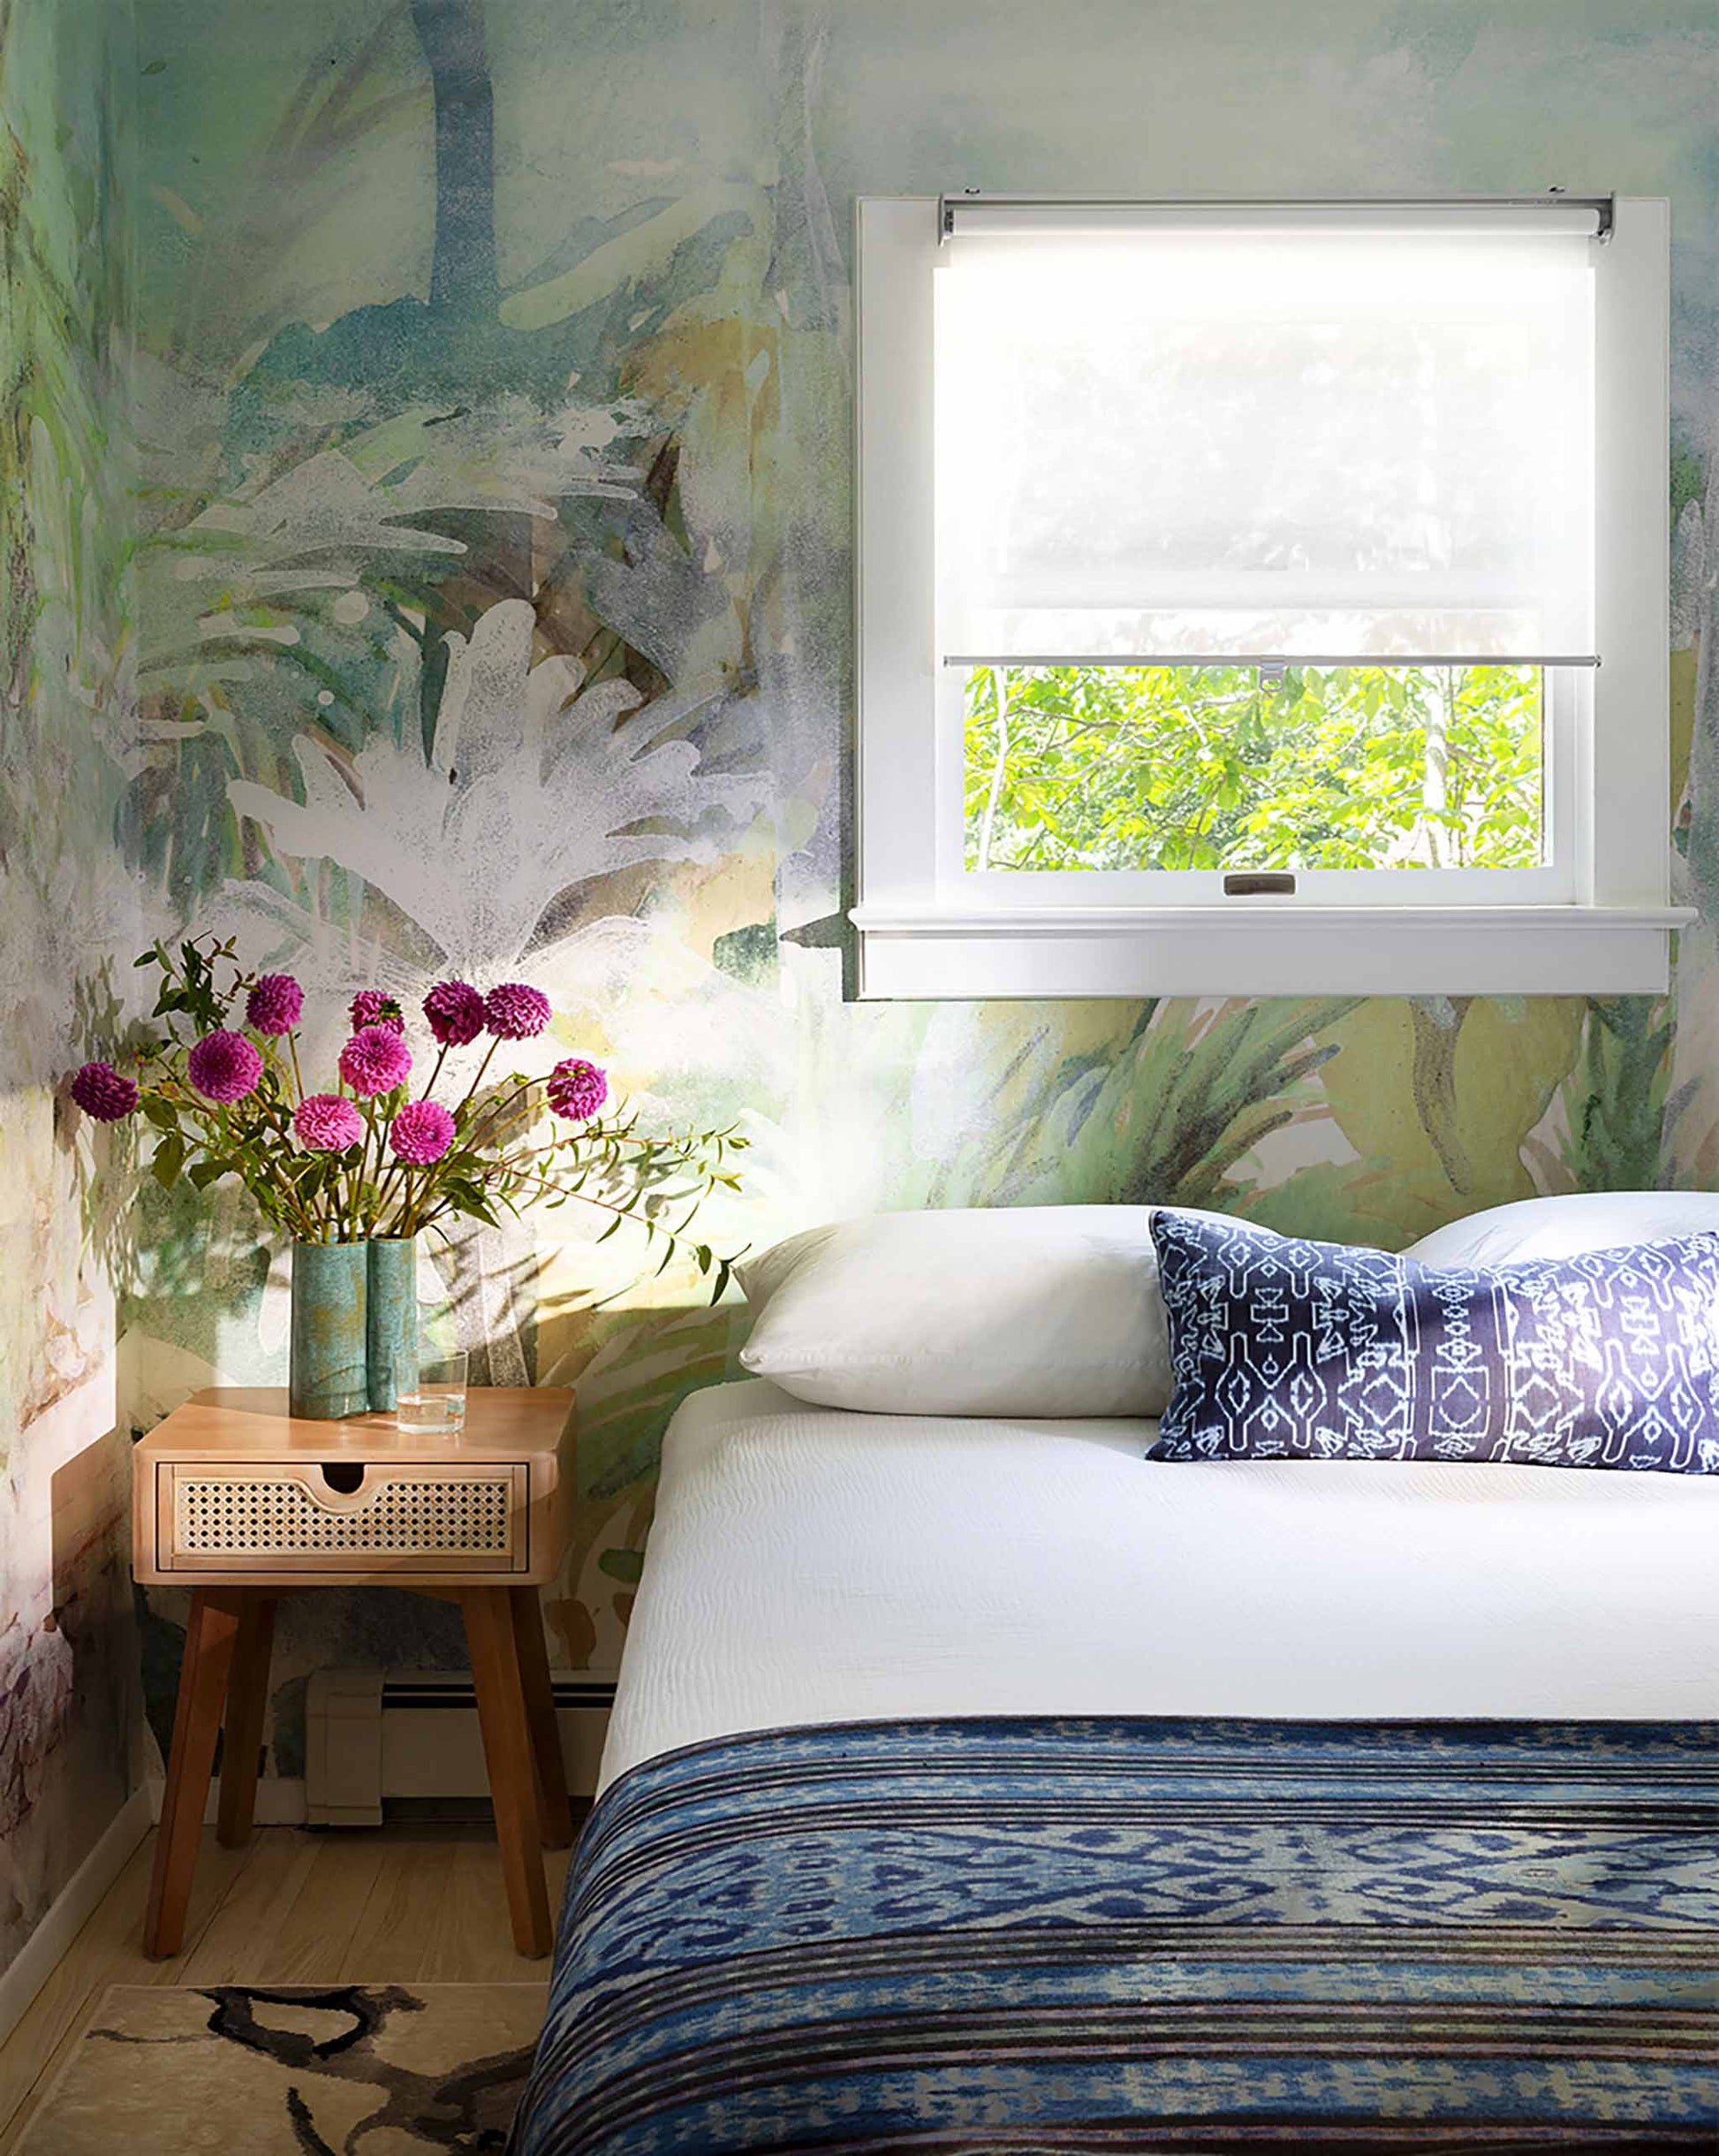 A cozy bedroom with a Regalo di Dio Wallpaper Mural||Verde, featuring a single bed with blue patterned linens, a small wooden bedside table, a vase with pink flowers, and a window showing green foliage.